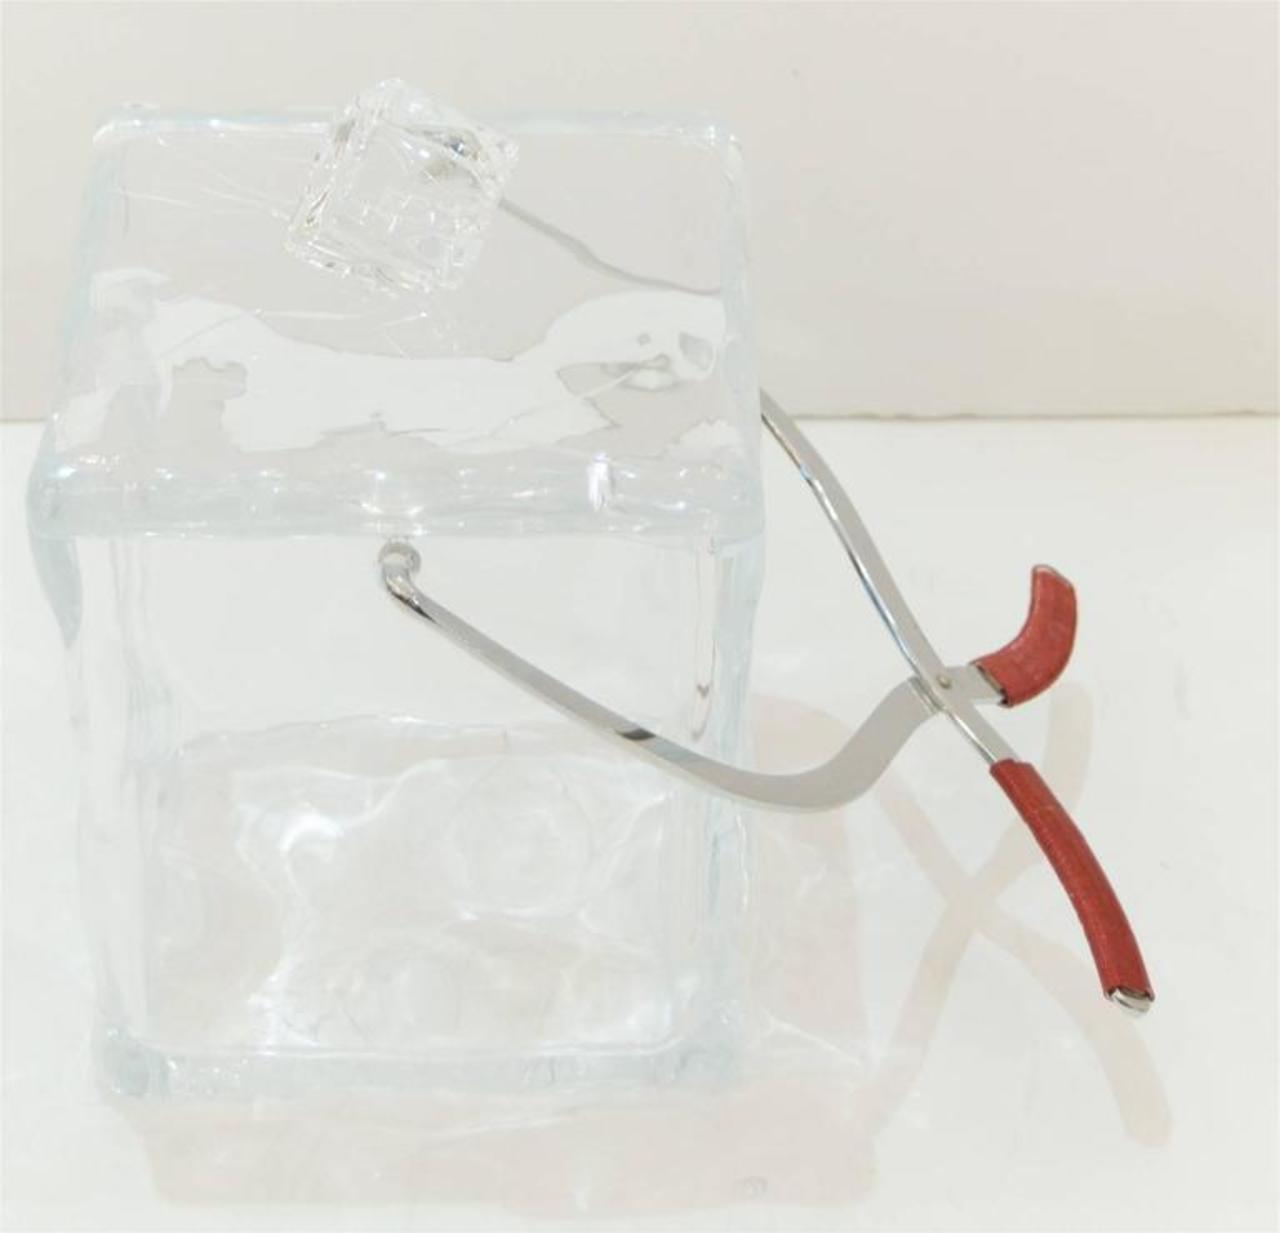 Ice Bucket - Cubed Design w/ Tongs - Clear Acrylic - Maze Home Store